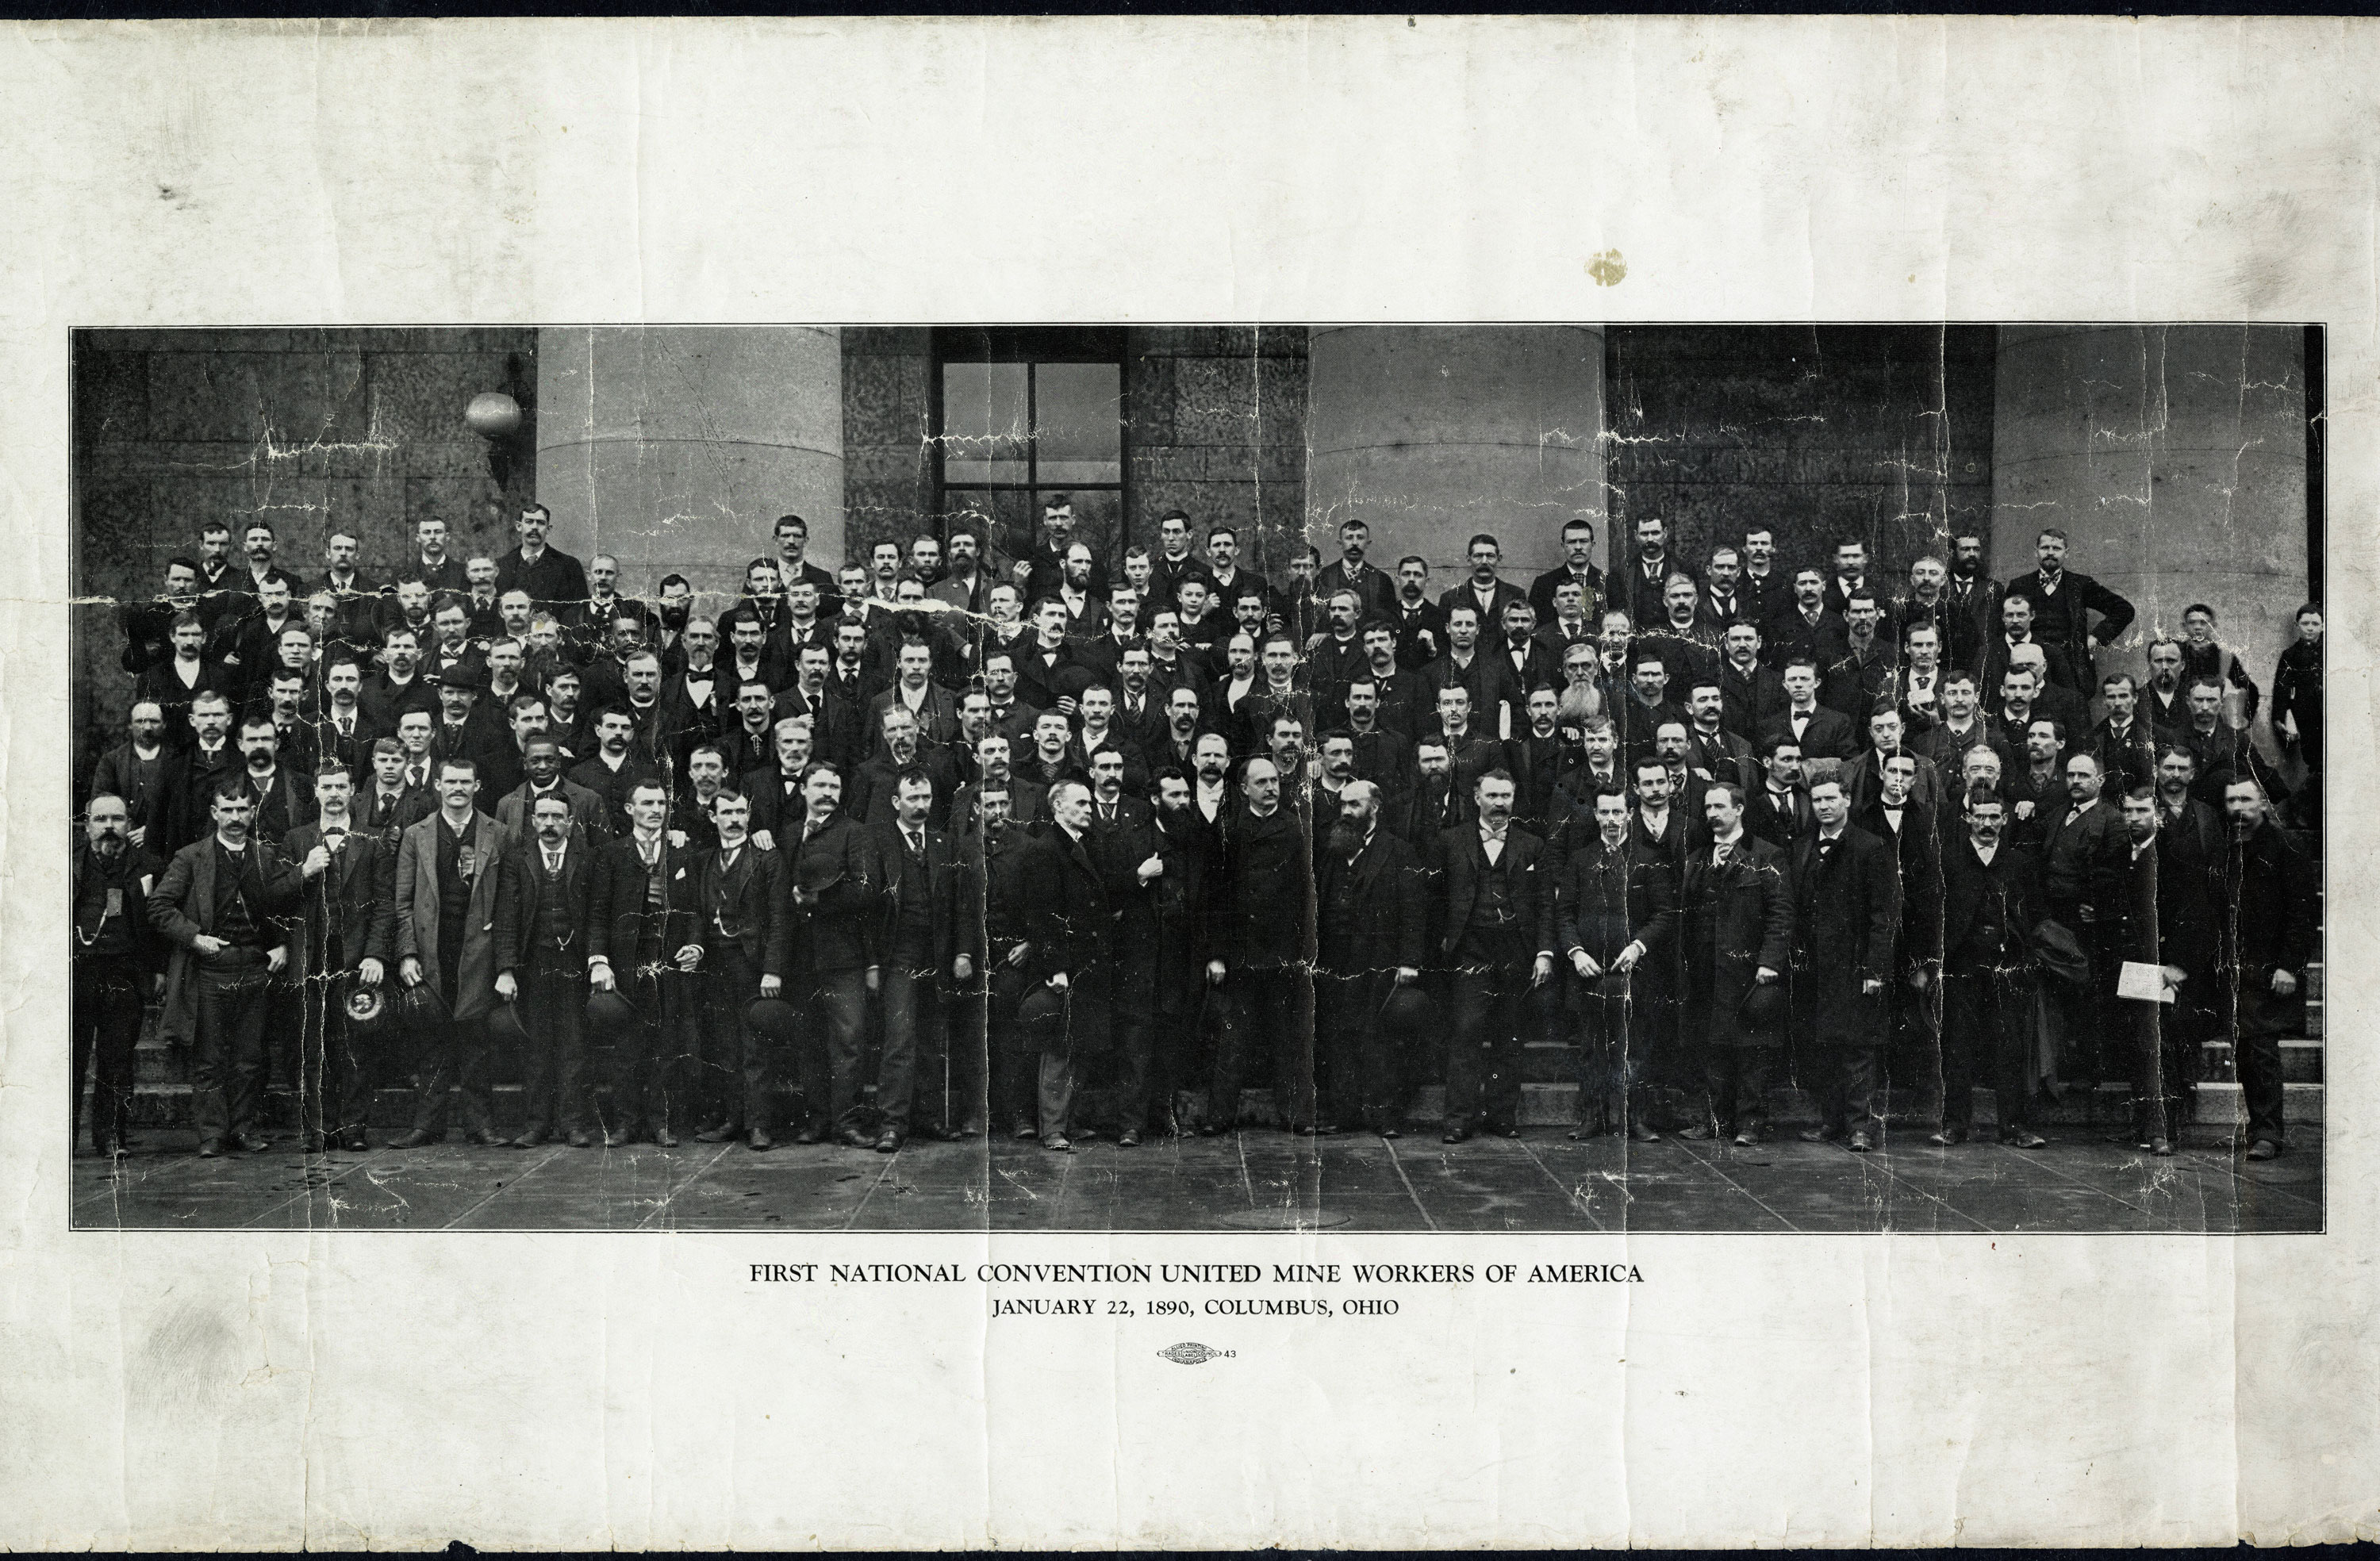 The United Mine Workers of America at the first national convention in 1890 in Columbus, Ohio.  (First national convention, United Mine Workers of America group panorama, 1890, United Mine workers of America, District 6 records, mss071, and Ohio University, Athens, Ohio)